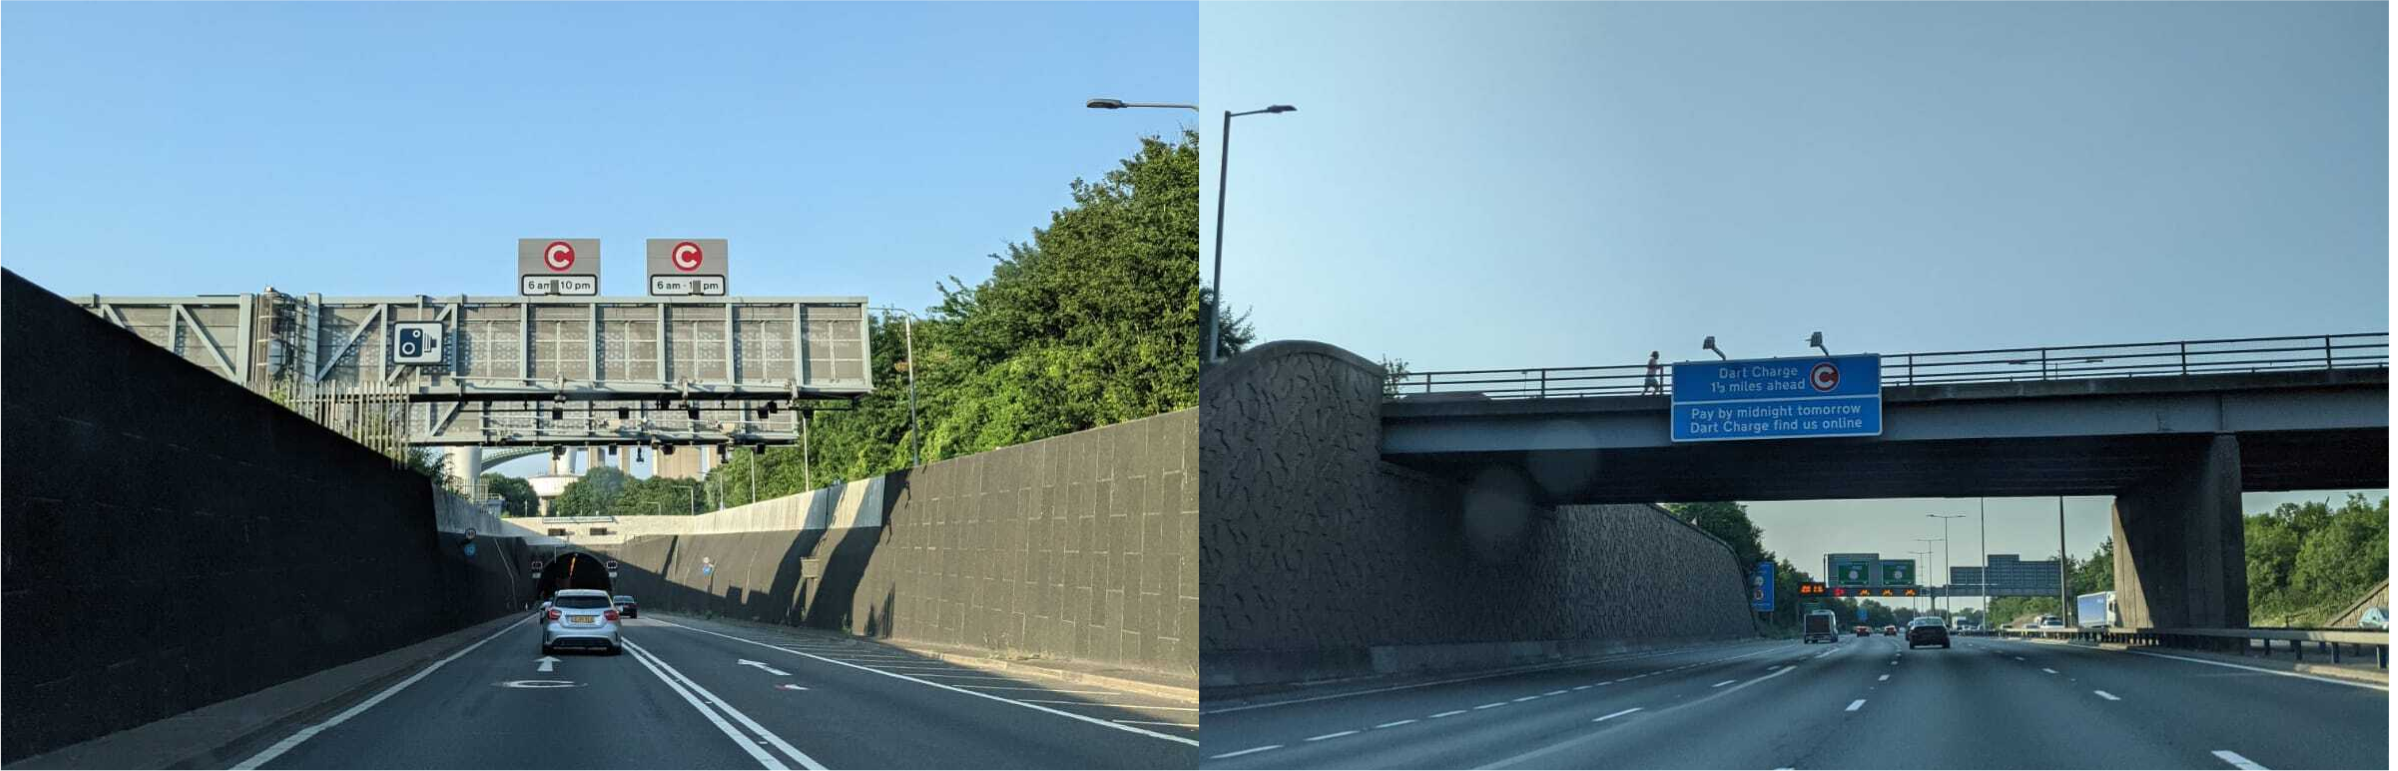 Various views that drivers see on the road when approaching the Dartford Crossing, with signs to remind them that the crossing is coming up.